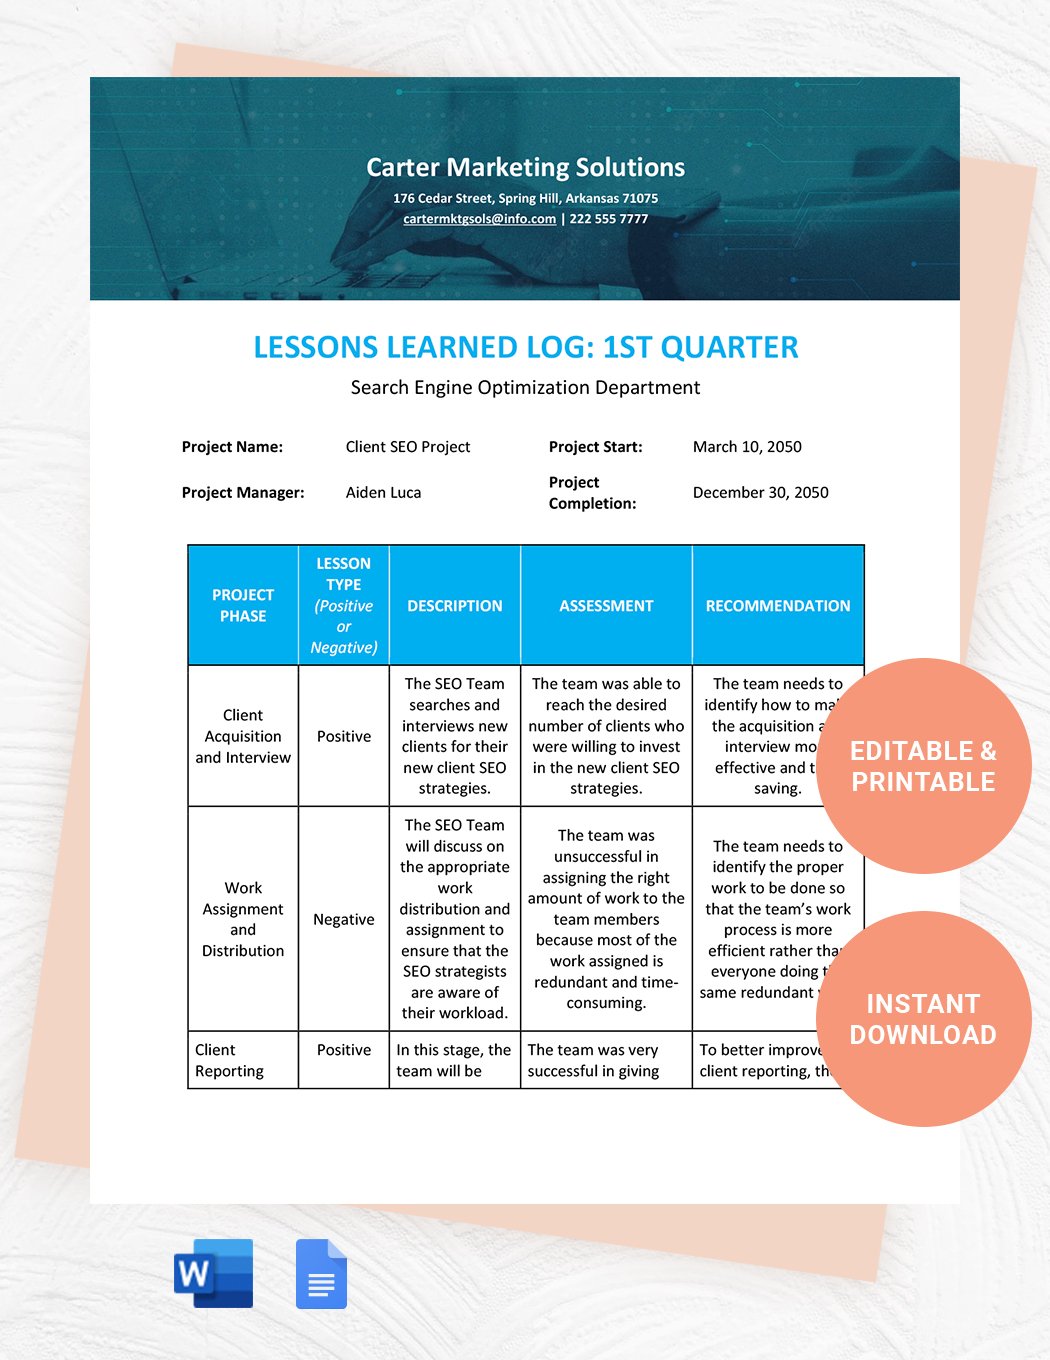 Free Lessons Learned Log Template in Word, Google Docs